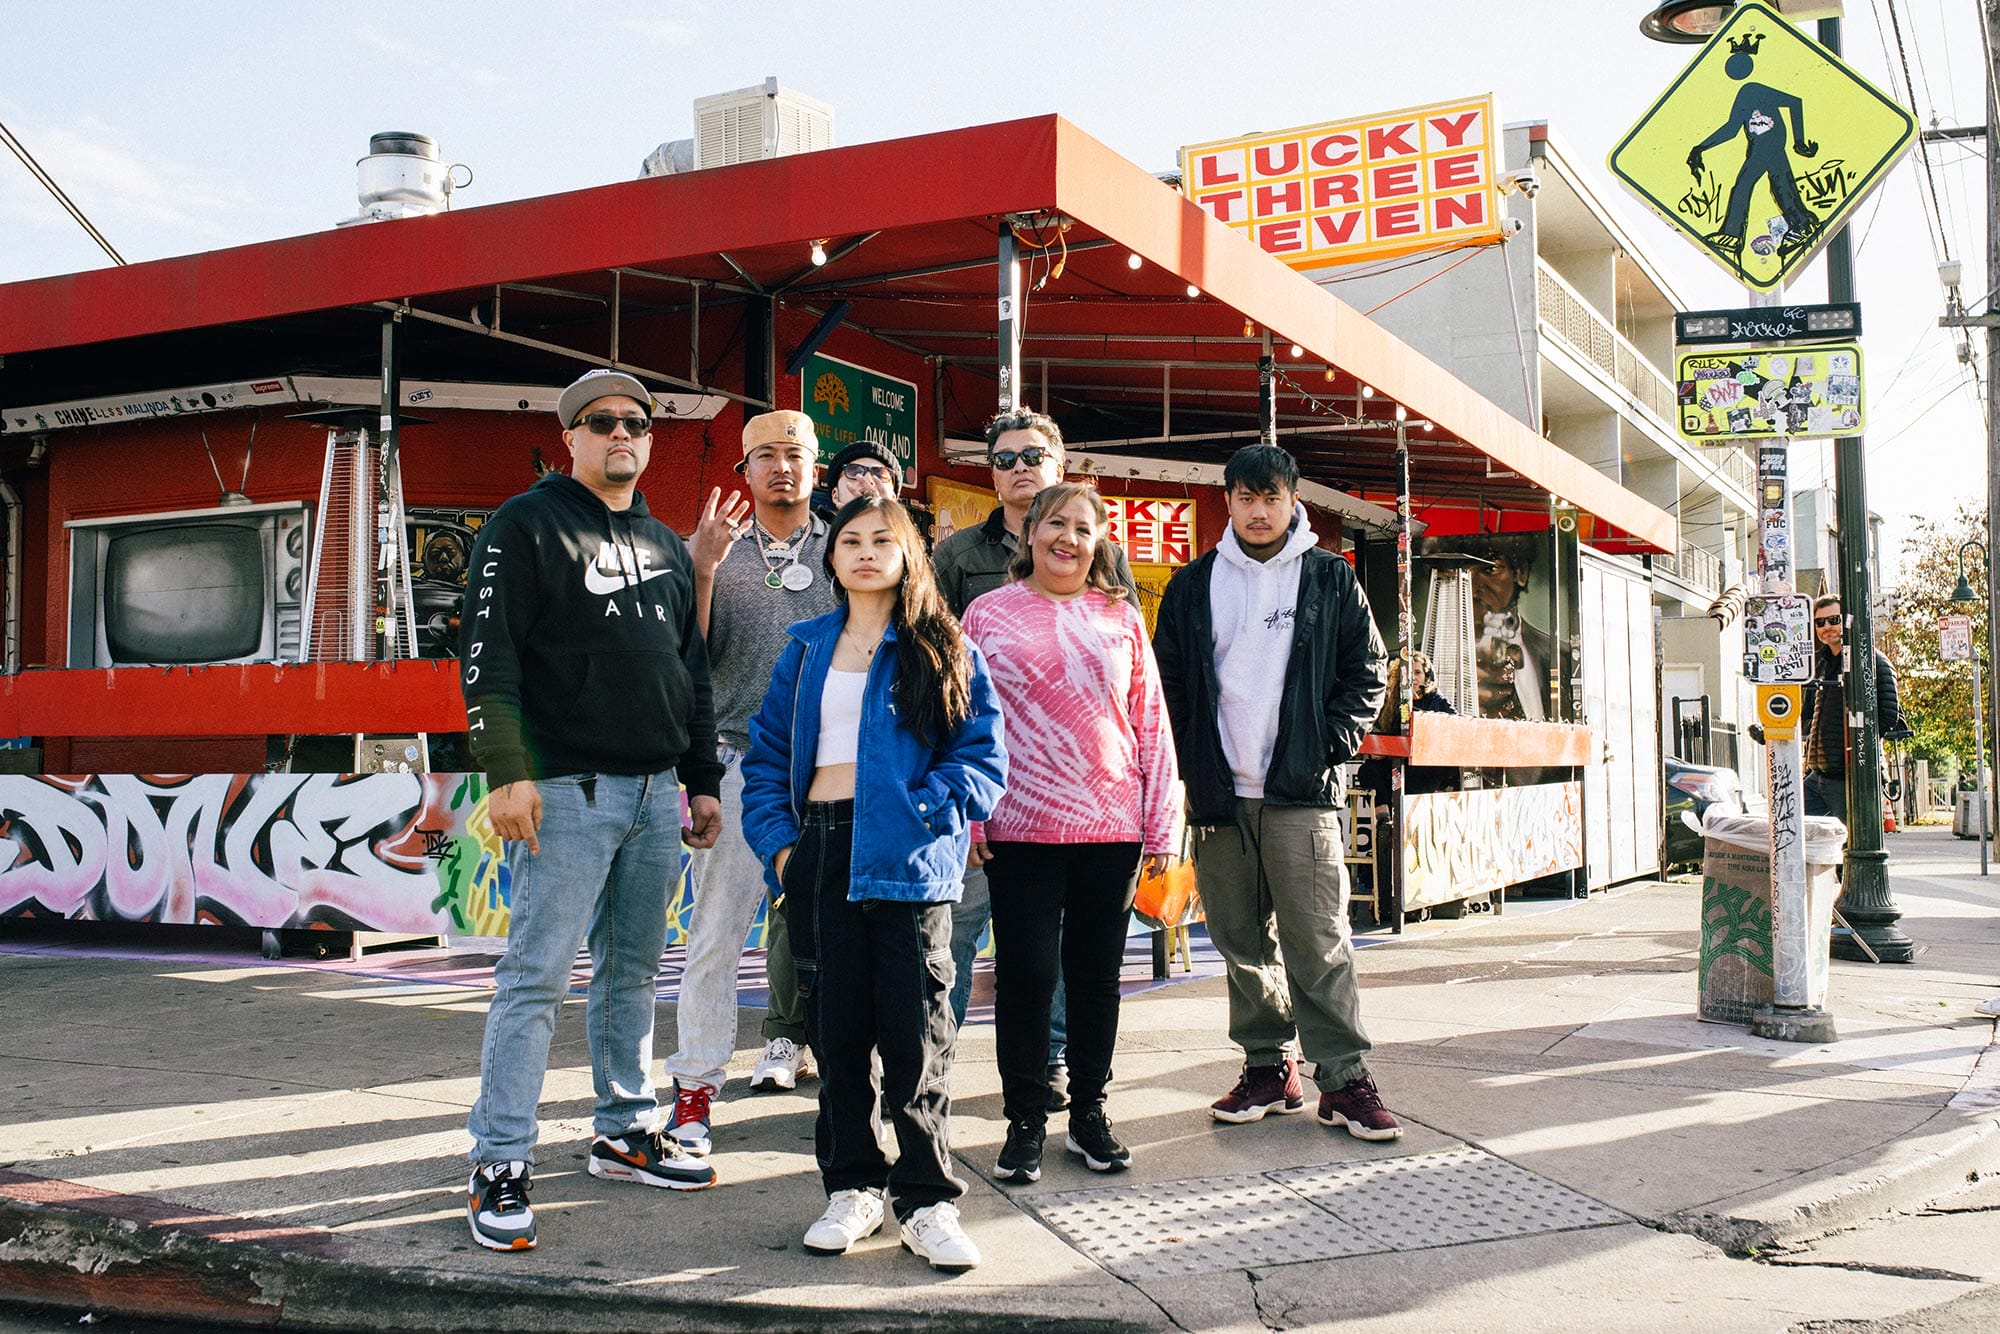 Ruby Ibarra stands with her collaborators in front of a restaurant known for their Filipino food.